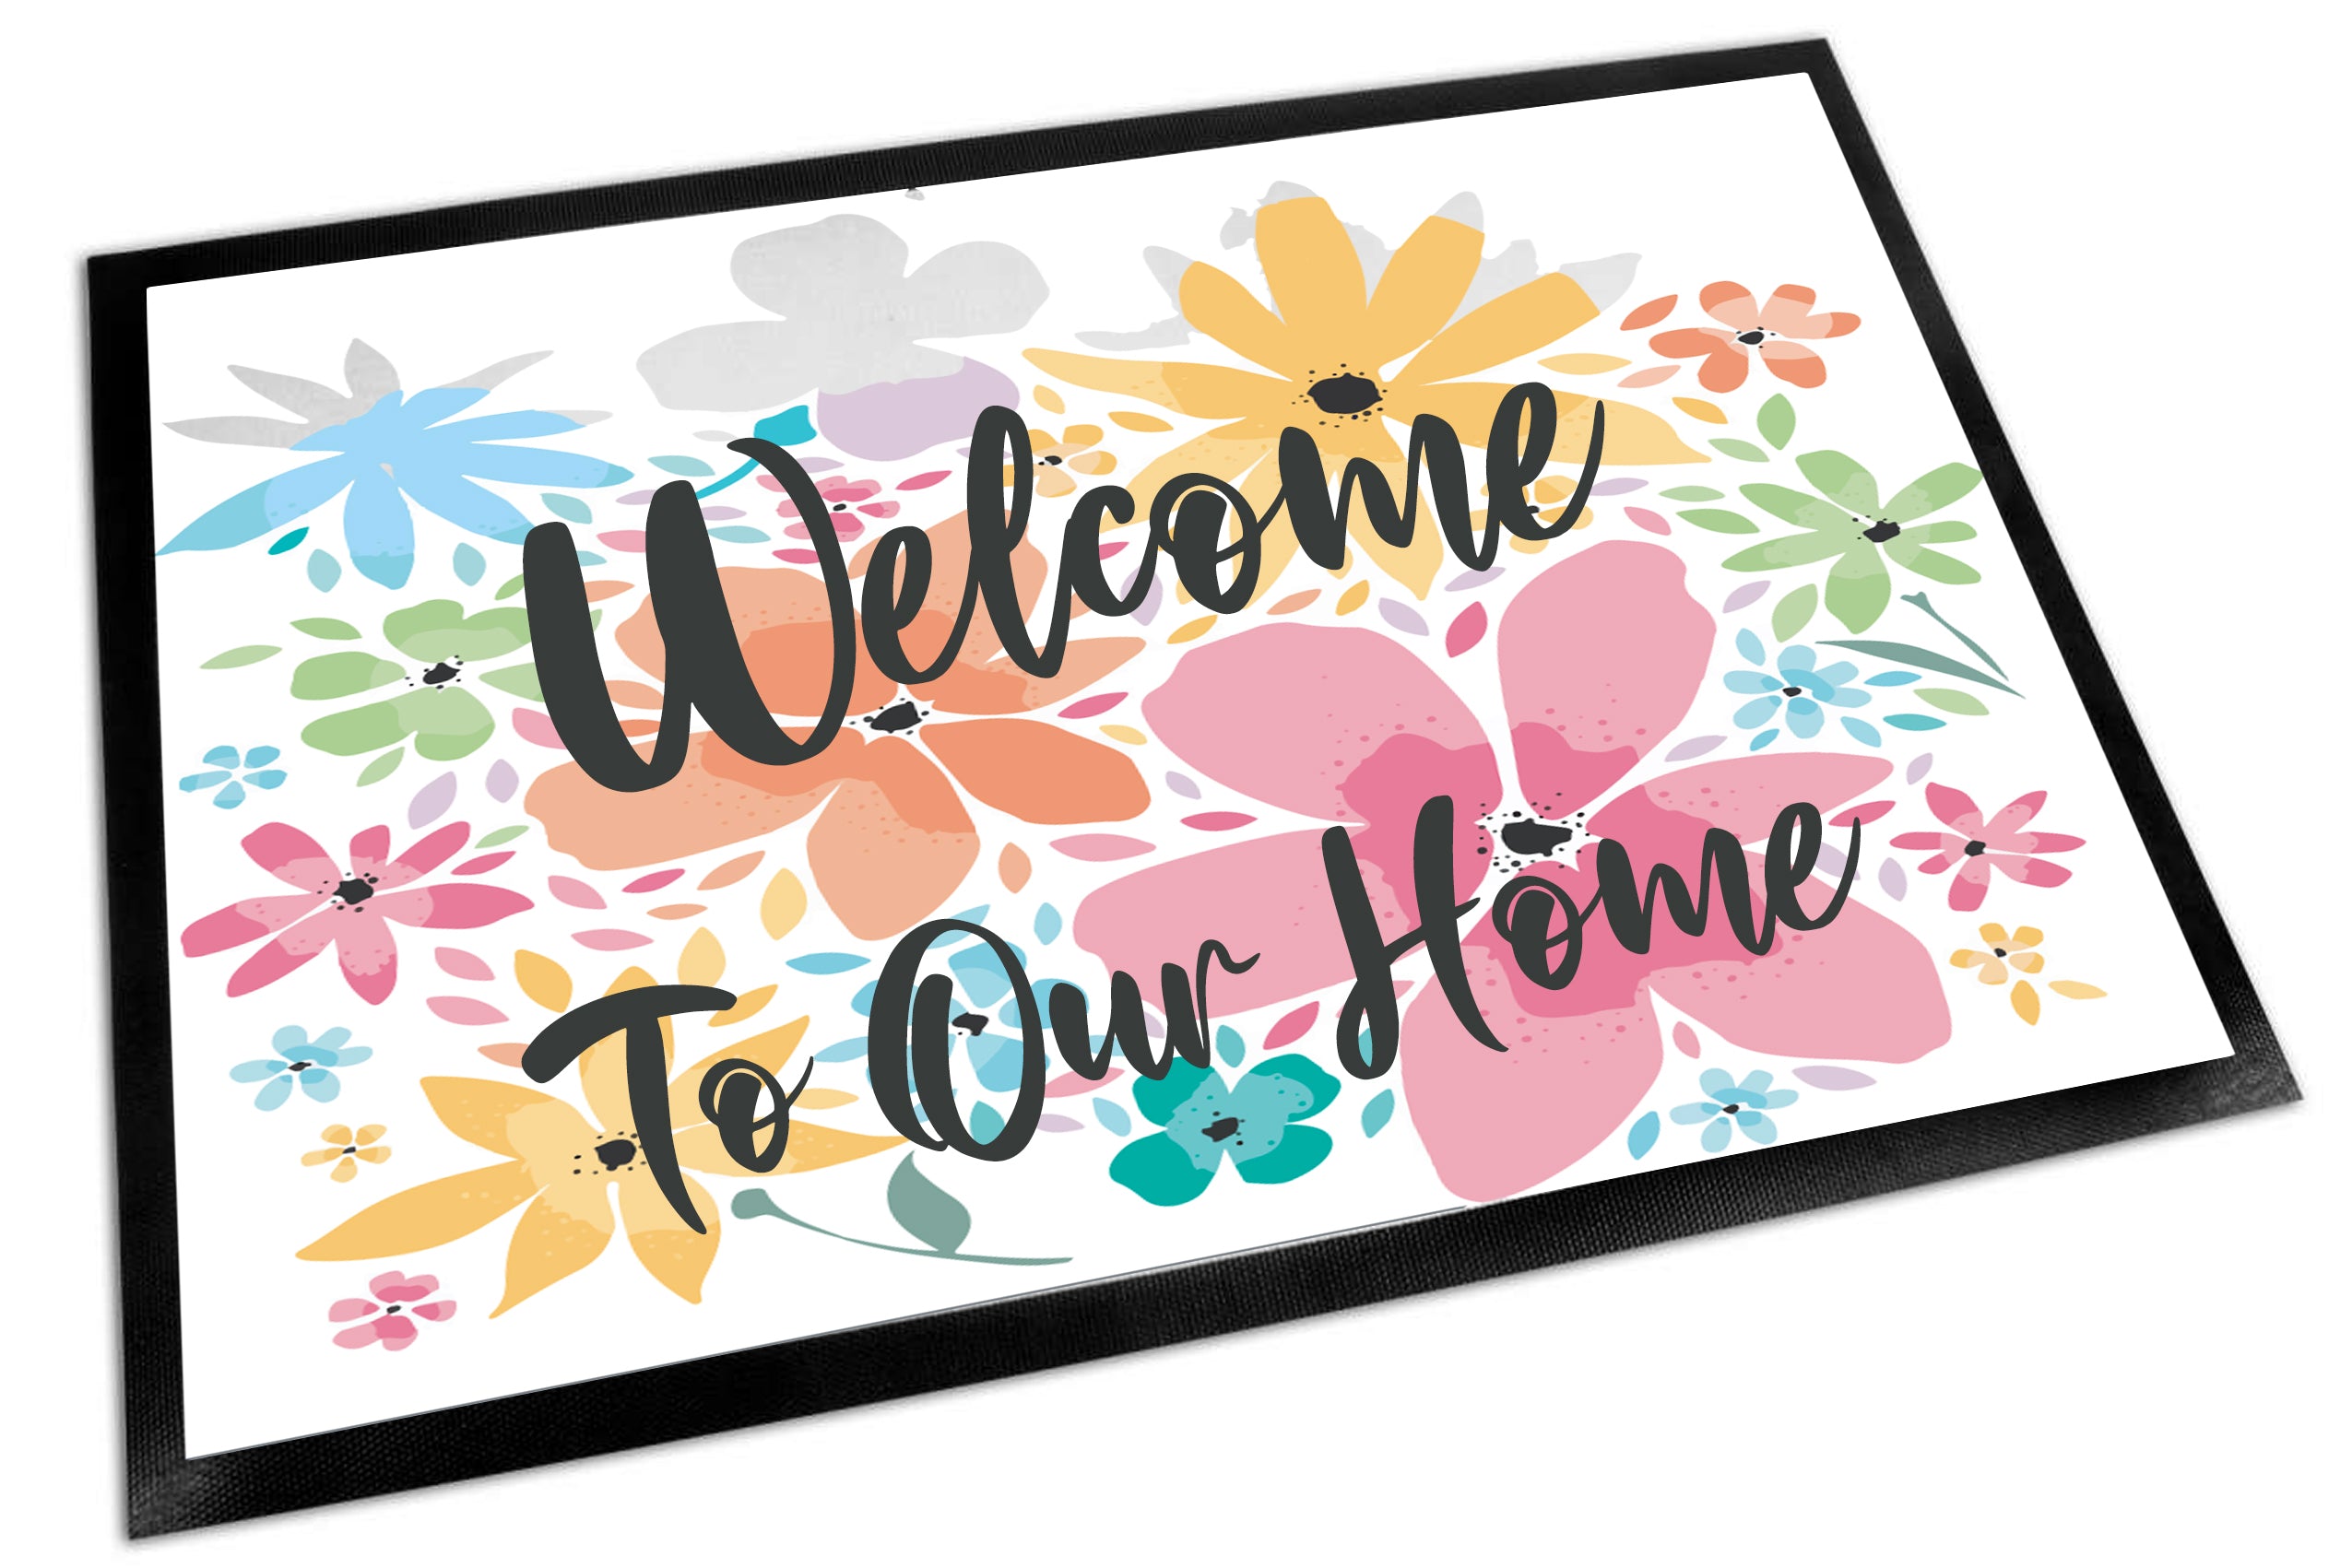 Personalised doormat with rubber edges, non-slip,